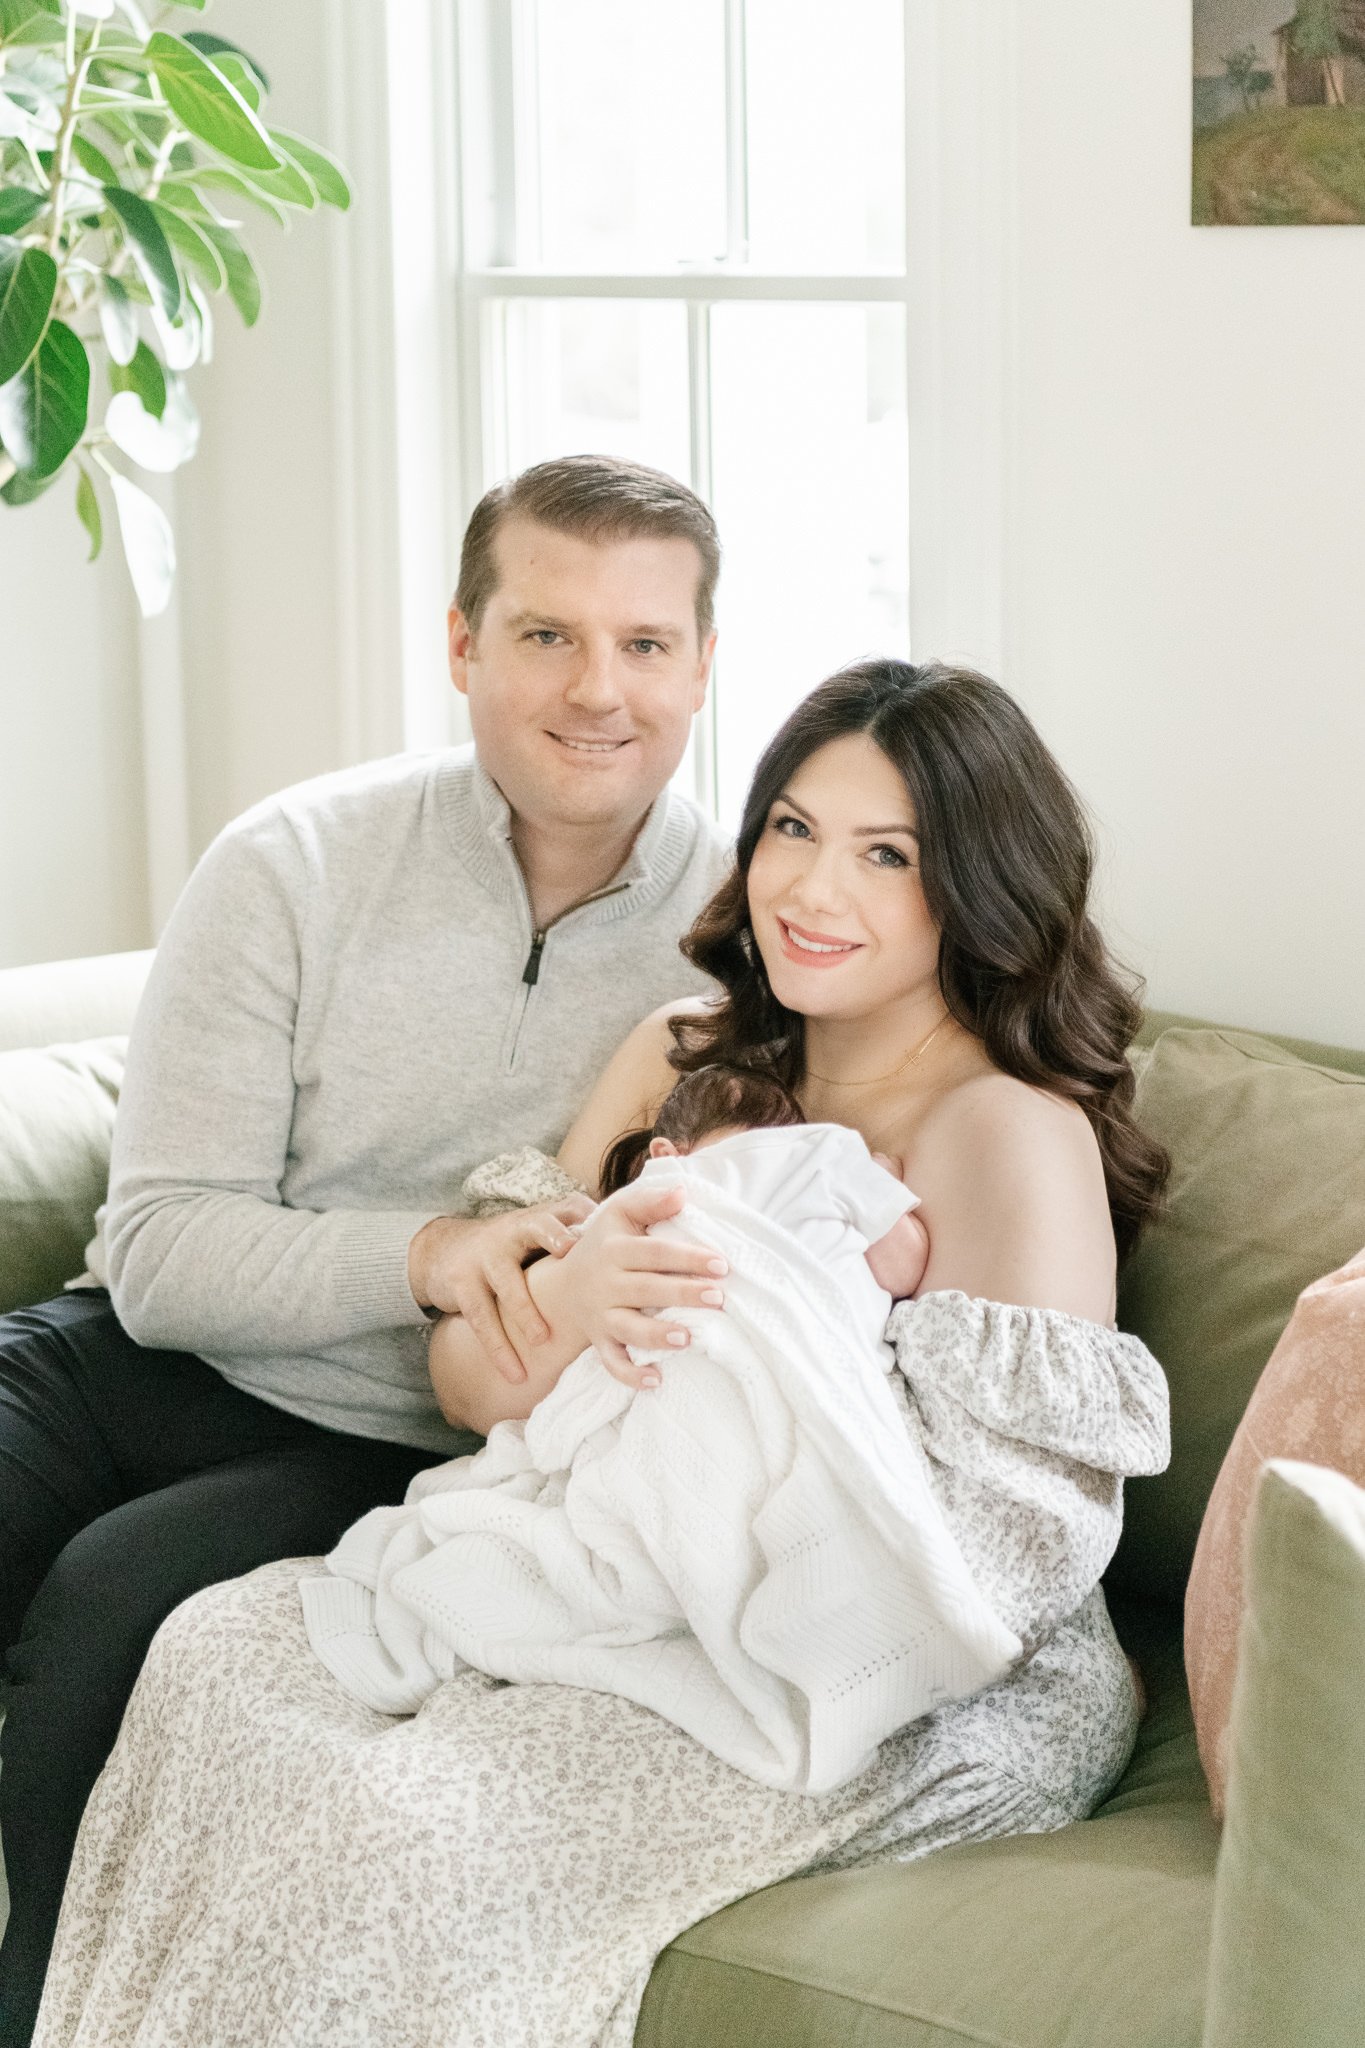  Montclair, NJ newborn photographer captures a portrait of a new mother, father, and baby by Nicole Hawkins Photography. family of three portrait newborn family portrait  #NicoleHawkinsPhotography #NicoleHawkinsNewborns #MontclairNewbornPhotographer 